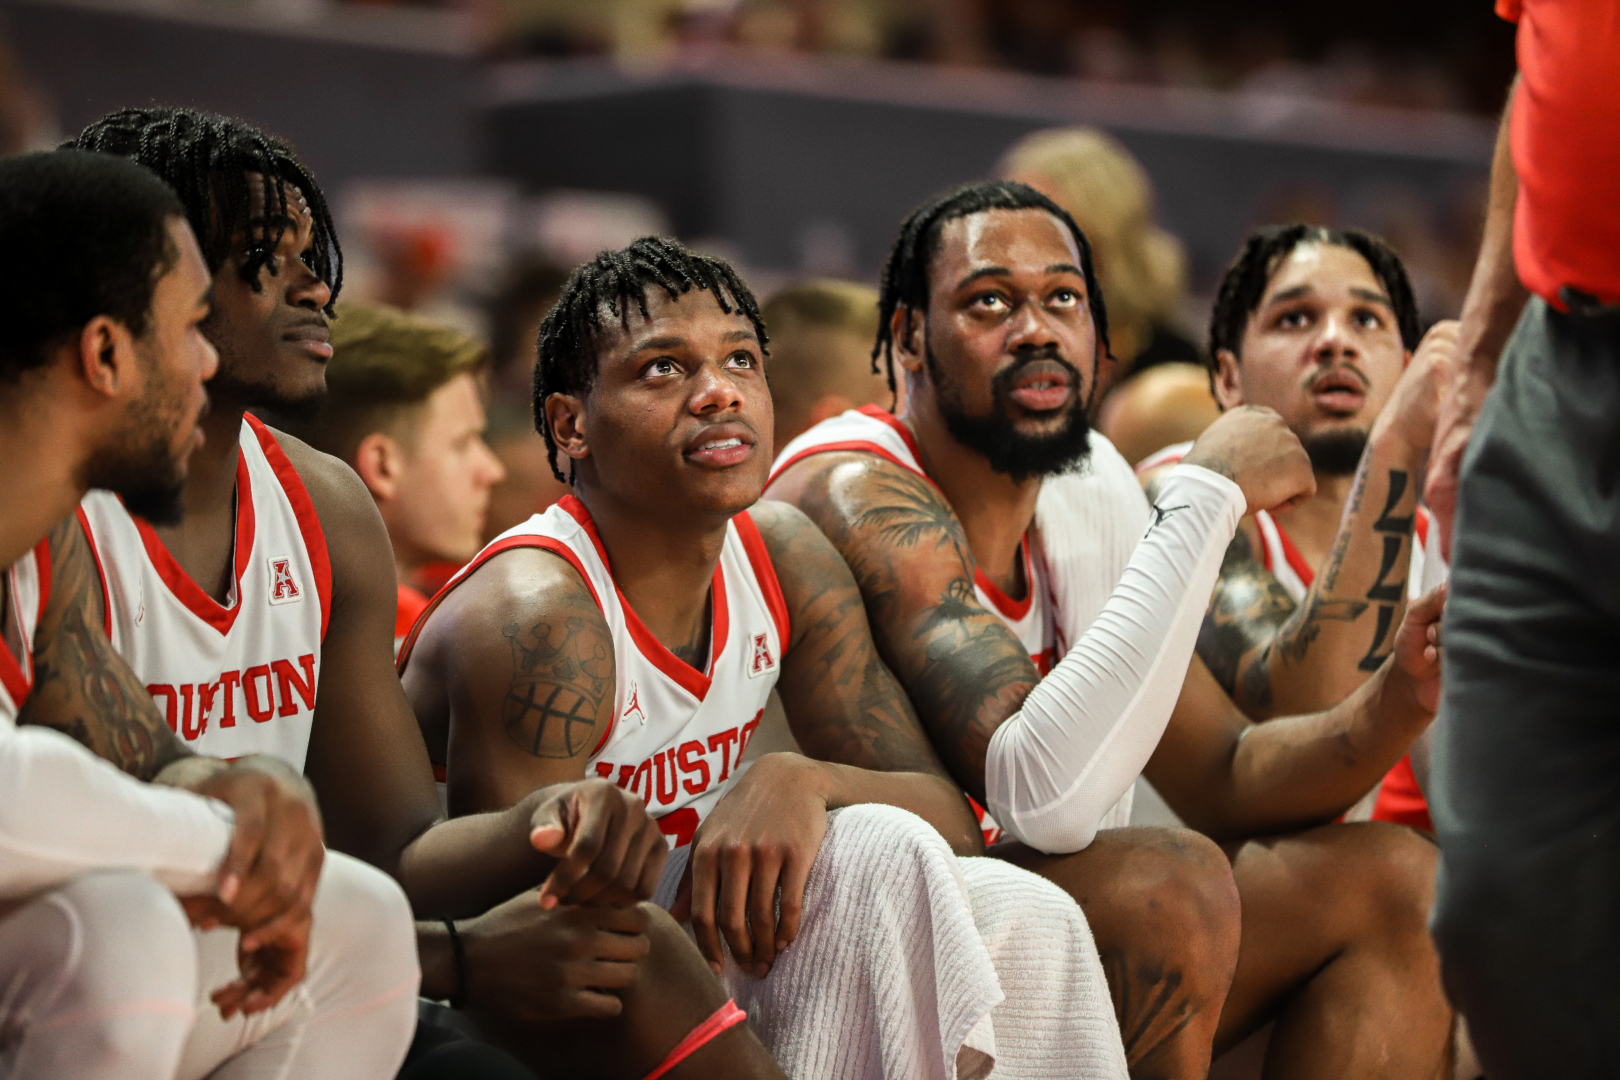 UH basketball is the Midwest Regional's No. 1 seed and the betting favorites to win the national championship. | Anh Le/The Cougar